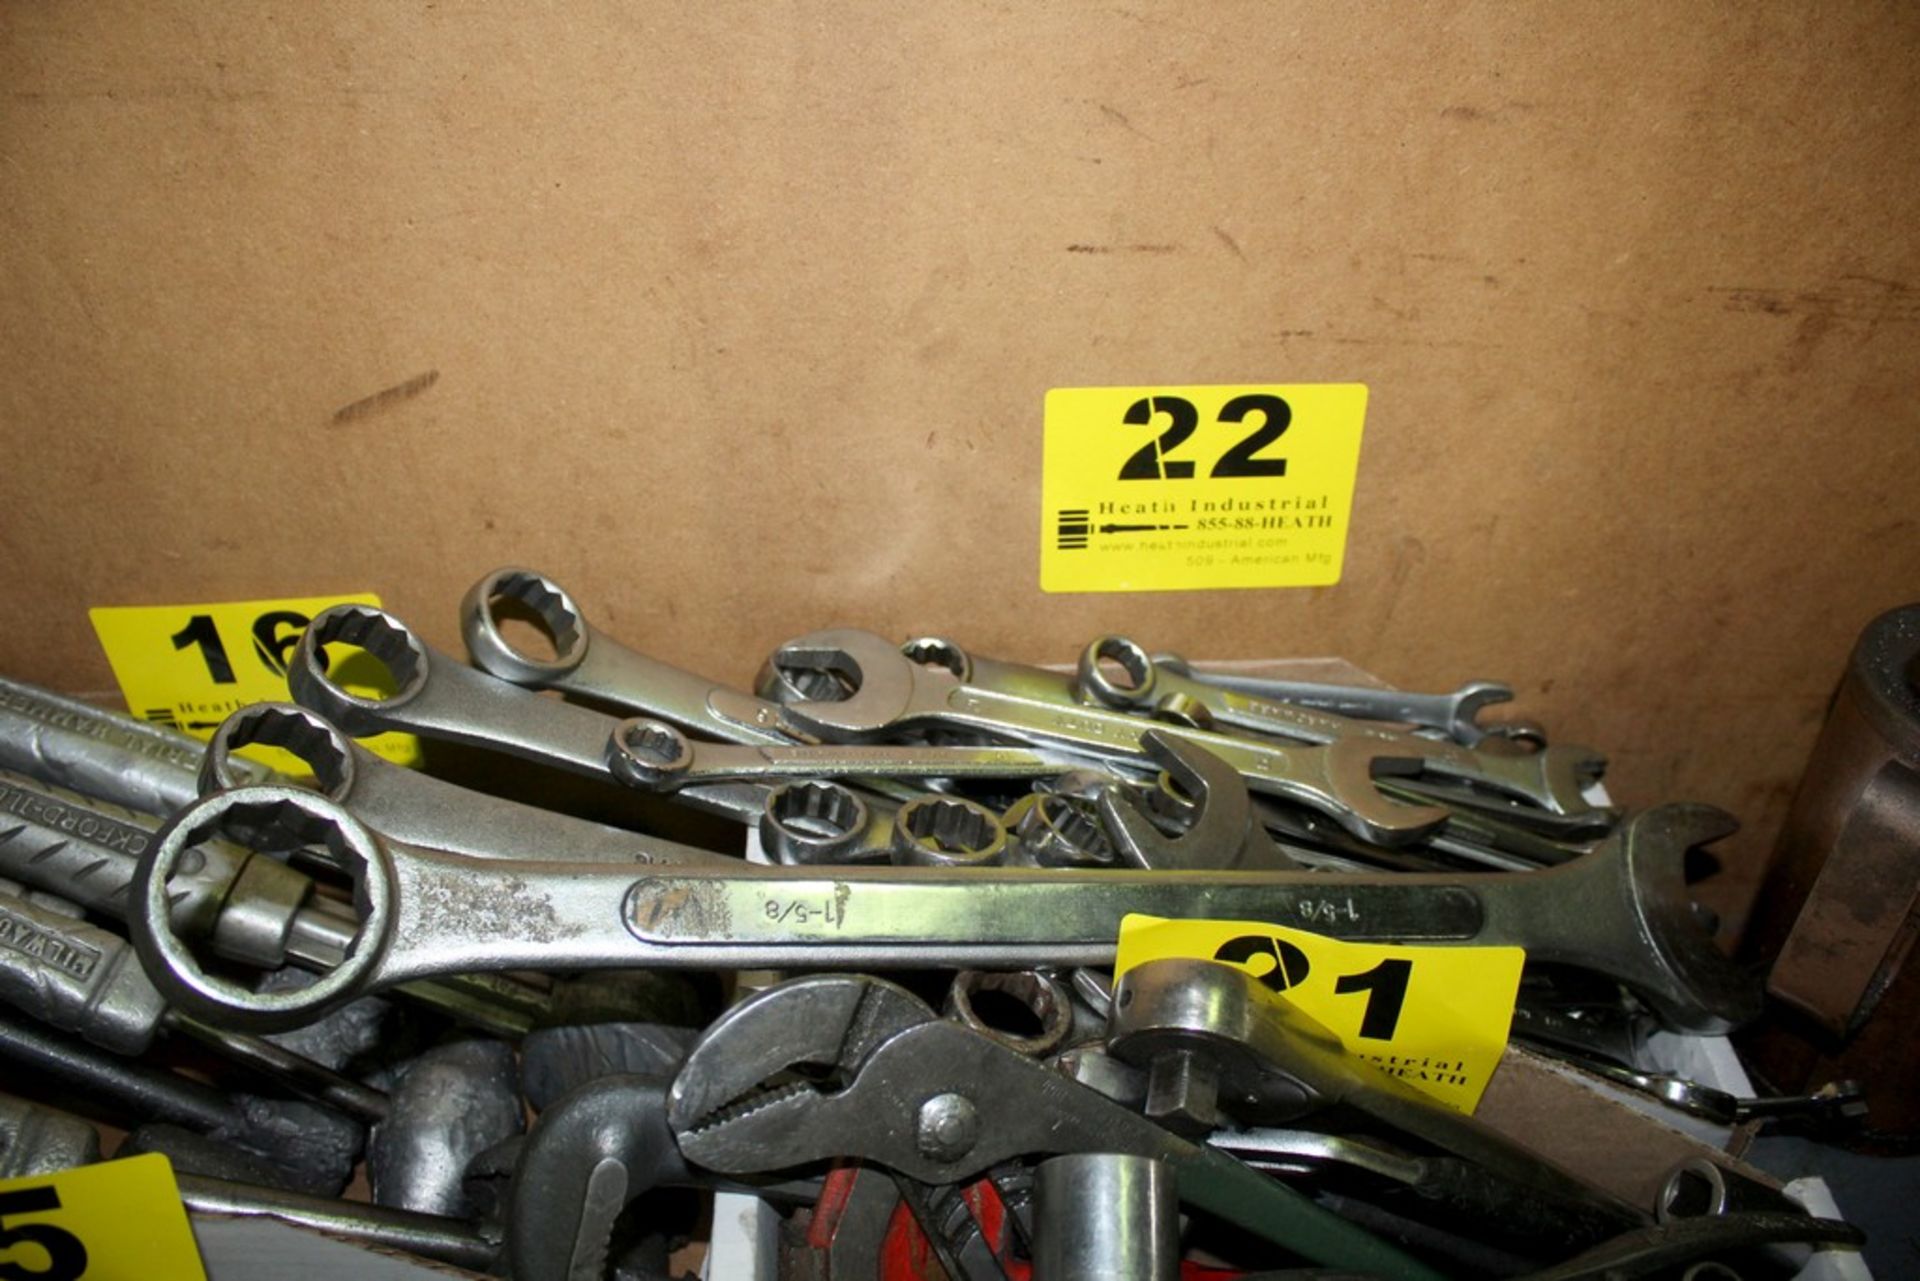 ASSORTED OPEN AND CLOSED WRENCHES IN BOX